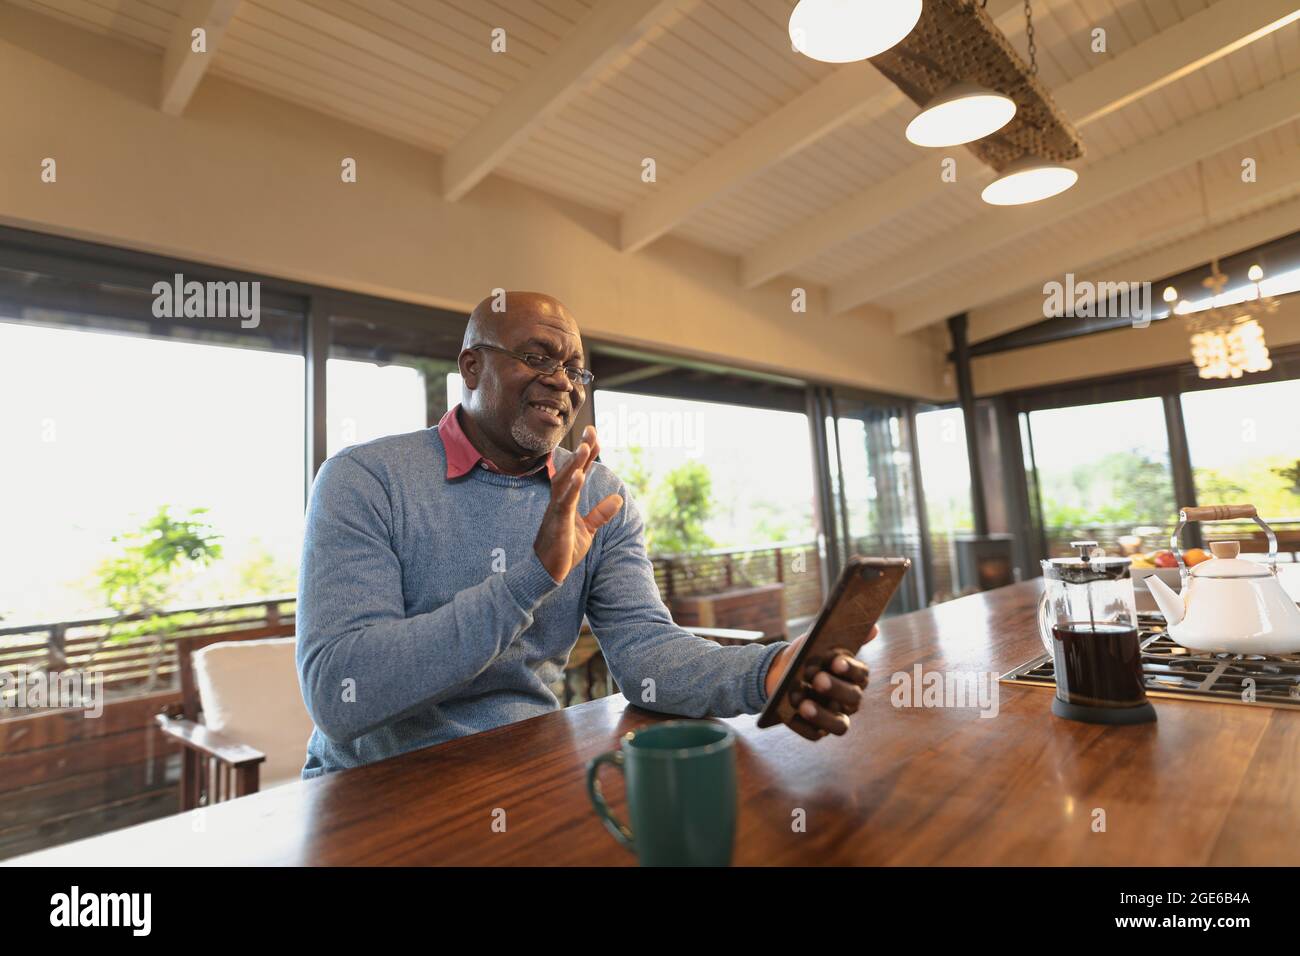 Smiling senior african american man siting in the modern kitchen and making video call Stock Photo